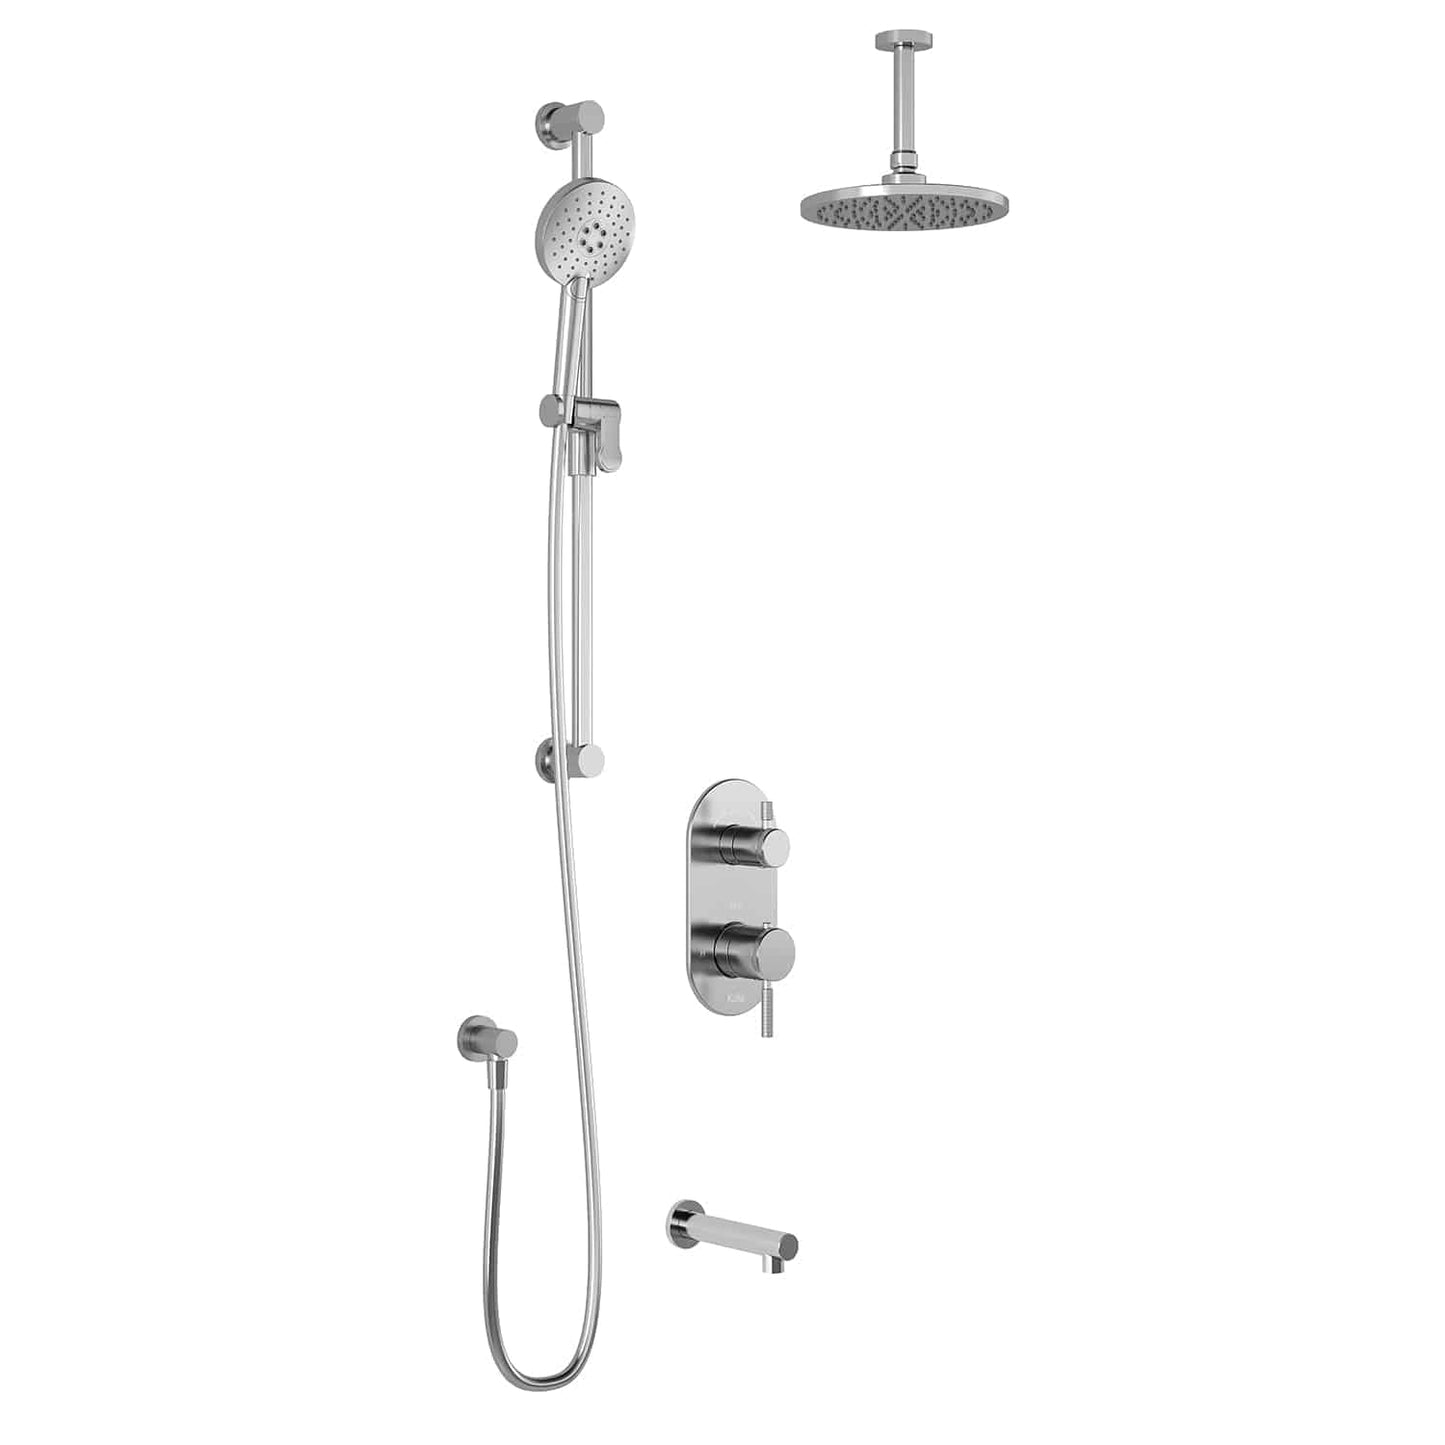 Kalia PRECISO TD3 AQUATONIK T/P with Diverter Shower System with 9" Round Shower Head and Vertical Ceiling Arm -Chrome